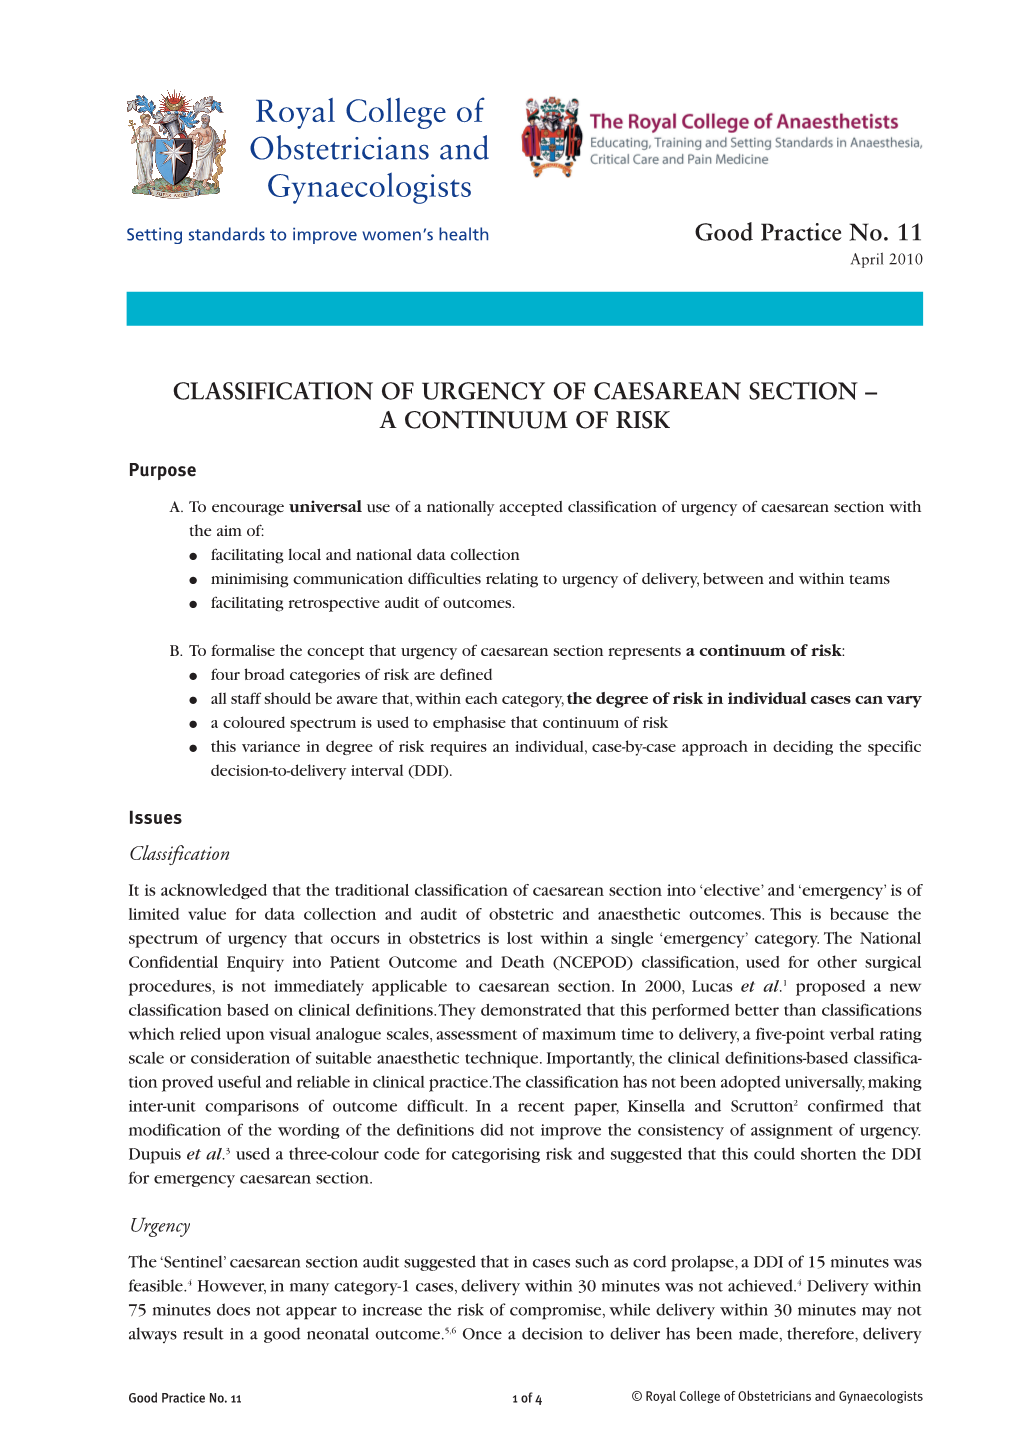 Classification of Urgency of Caesarean Section – a Continuum of Risk